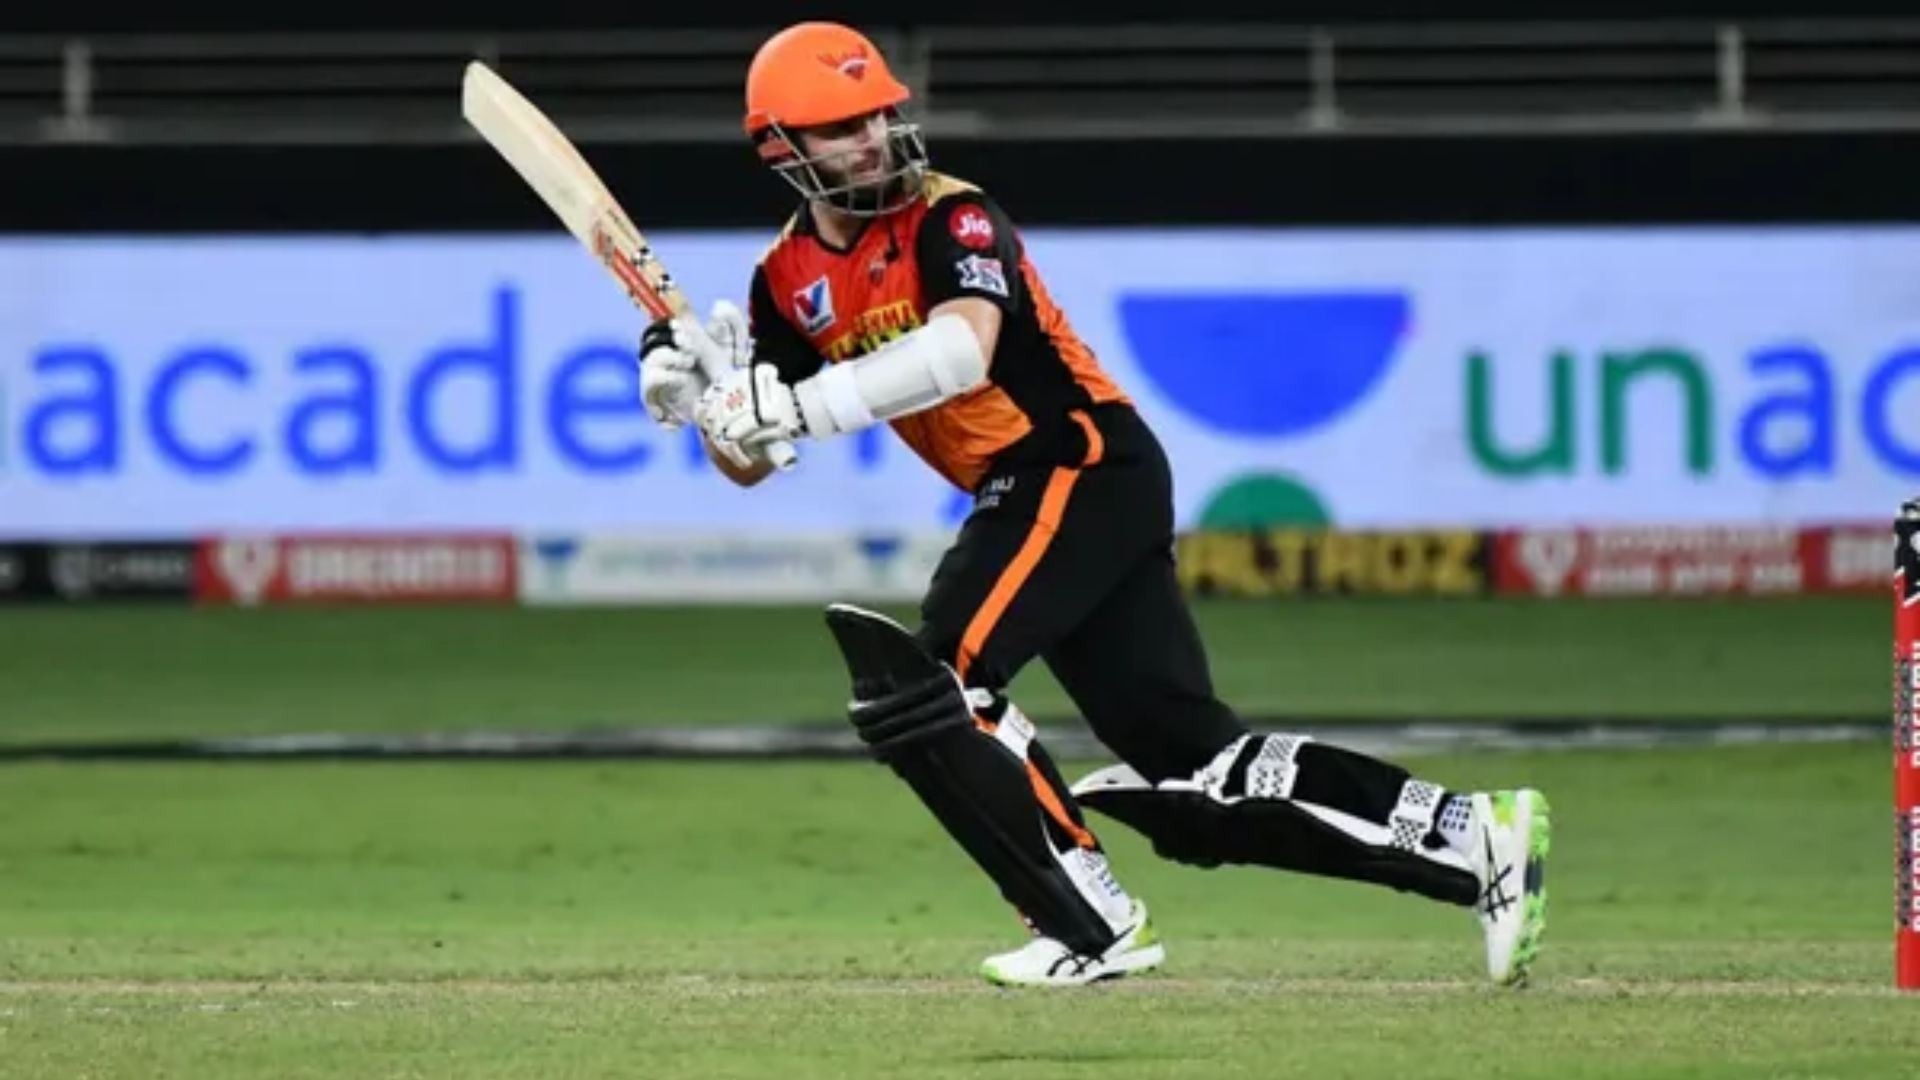 Kane Williamson is back for Sunrisers Hyderabad while Chris Gayle has been left out for Punjab Kings.